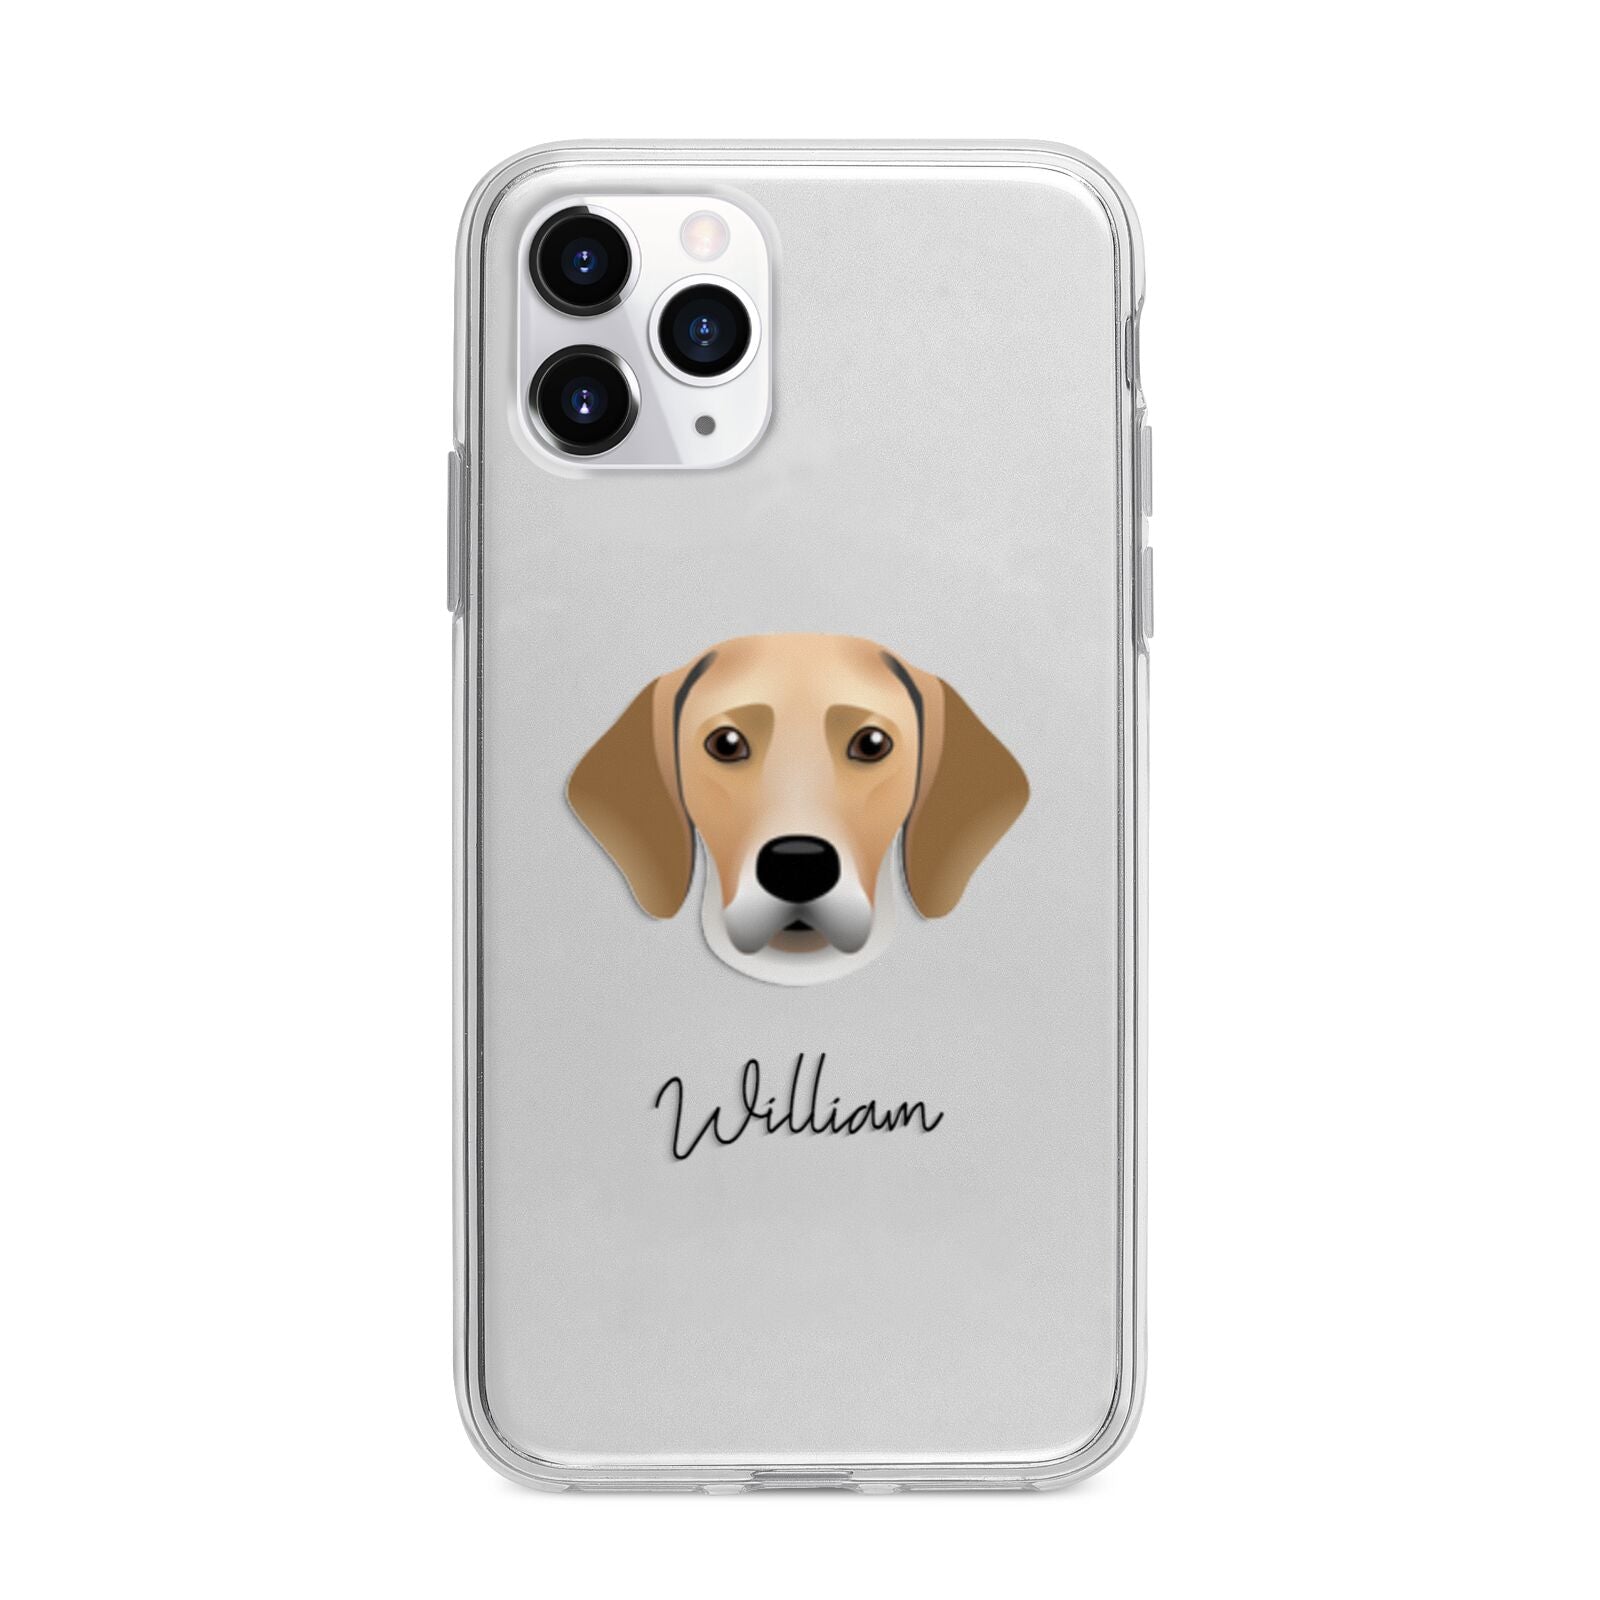 Harrier Personalised Apple iPhone 11 Pro in Silver with Bumper Case